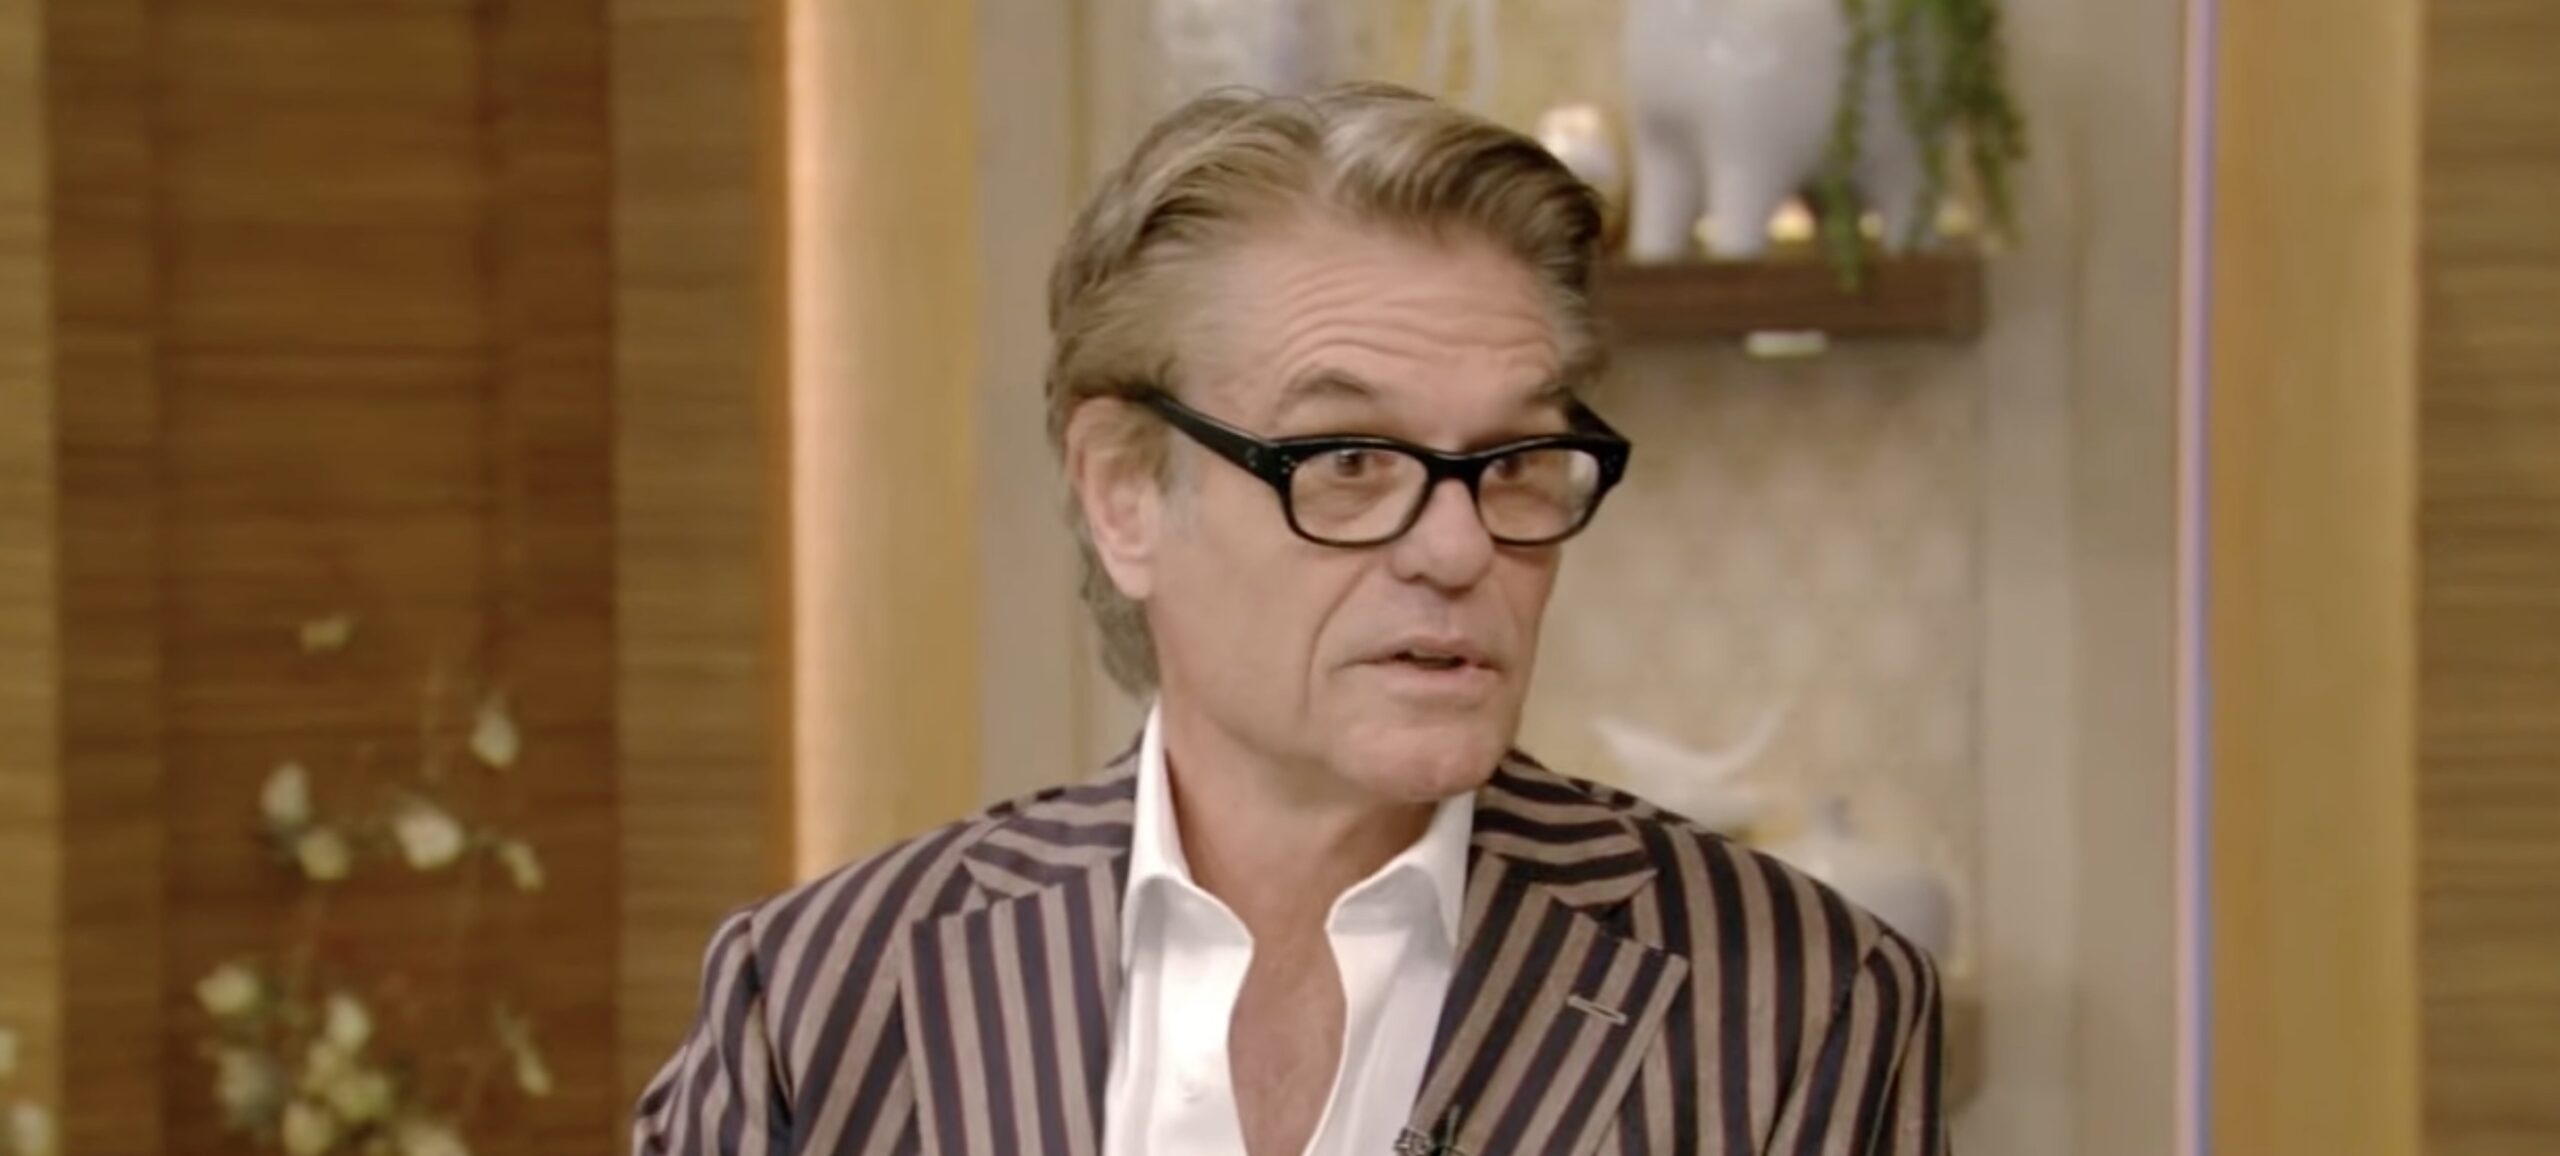 Harry Hamlin says playing gay role in 1982 ended his film career